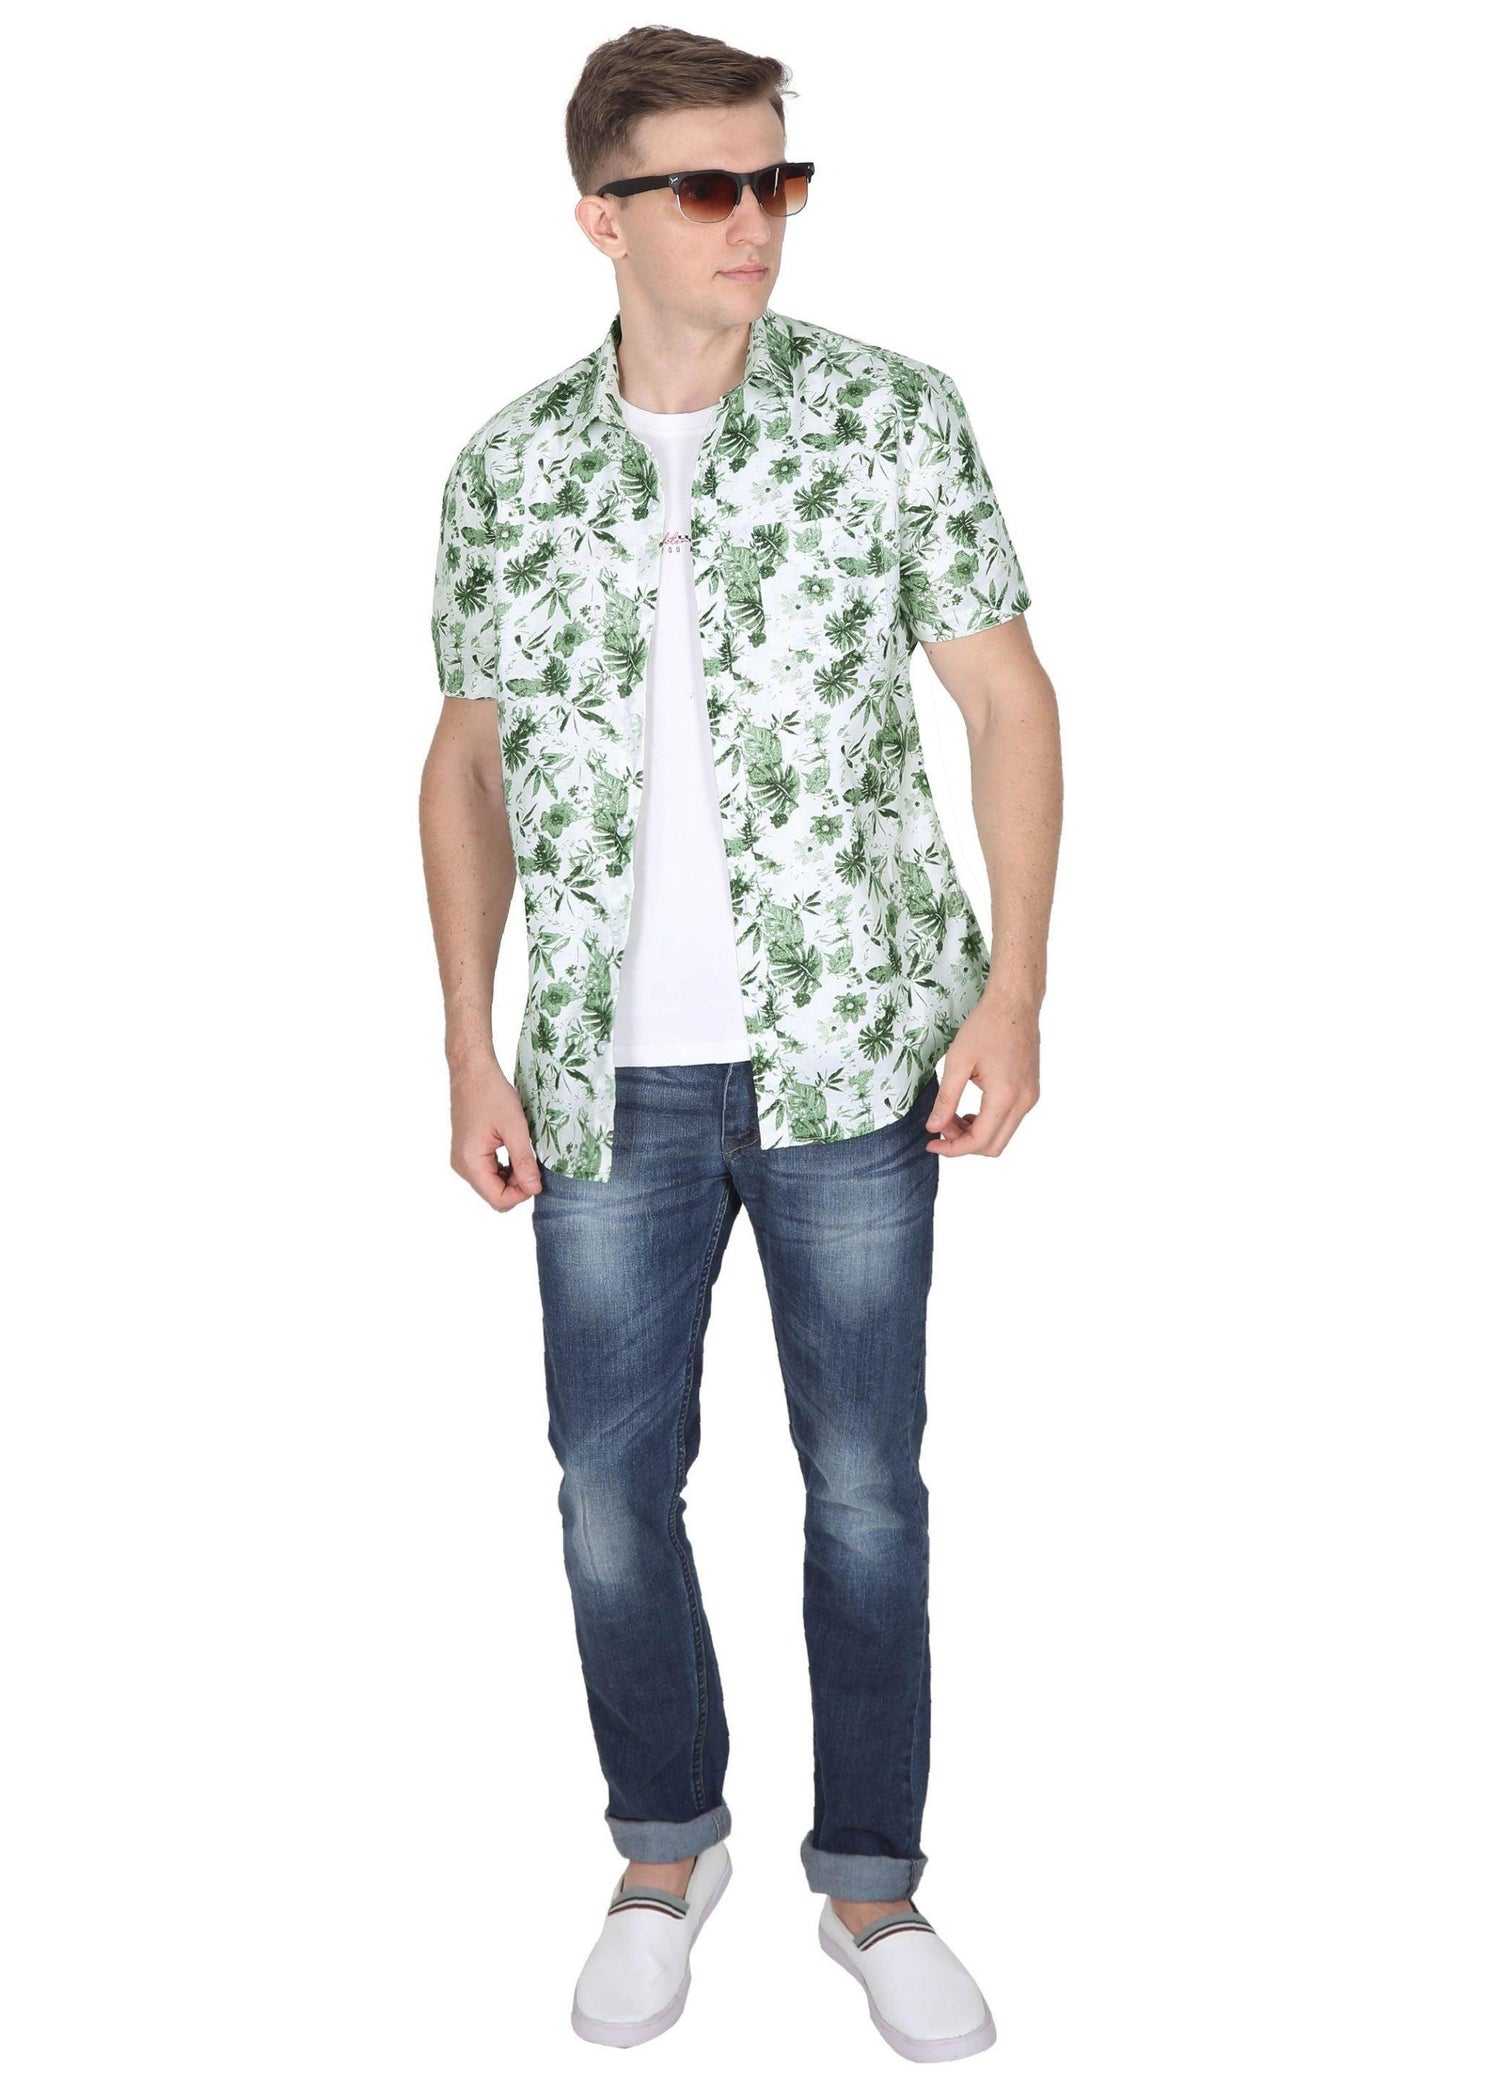 Tusok-orchardFeatured Shirt, Vacation-Printed Shirtimage-Green Linen (6)